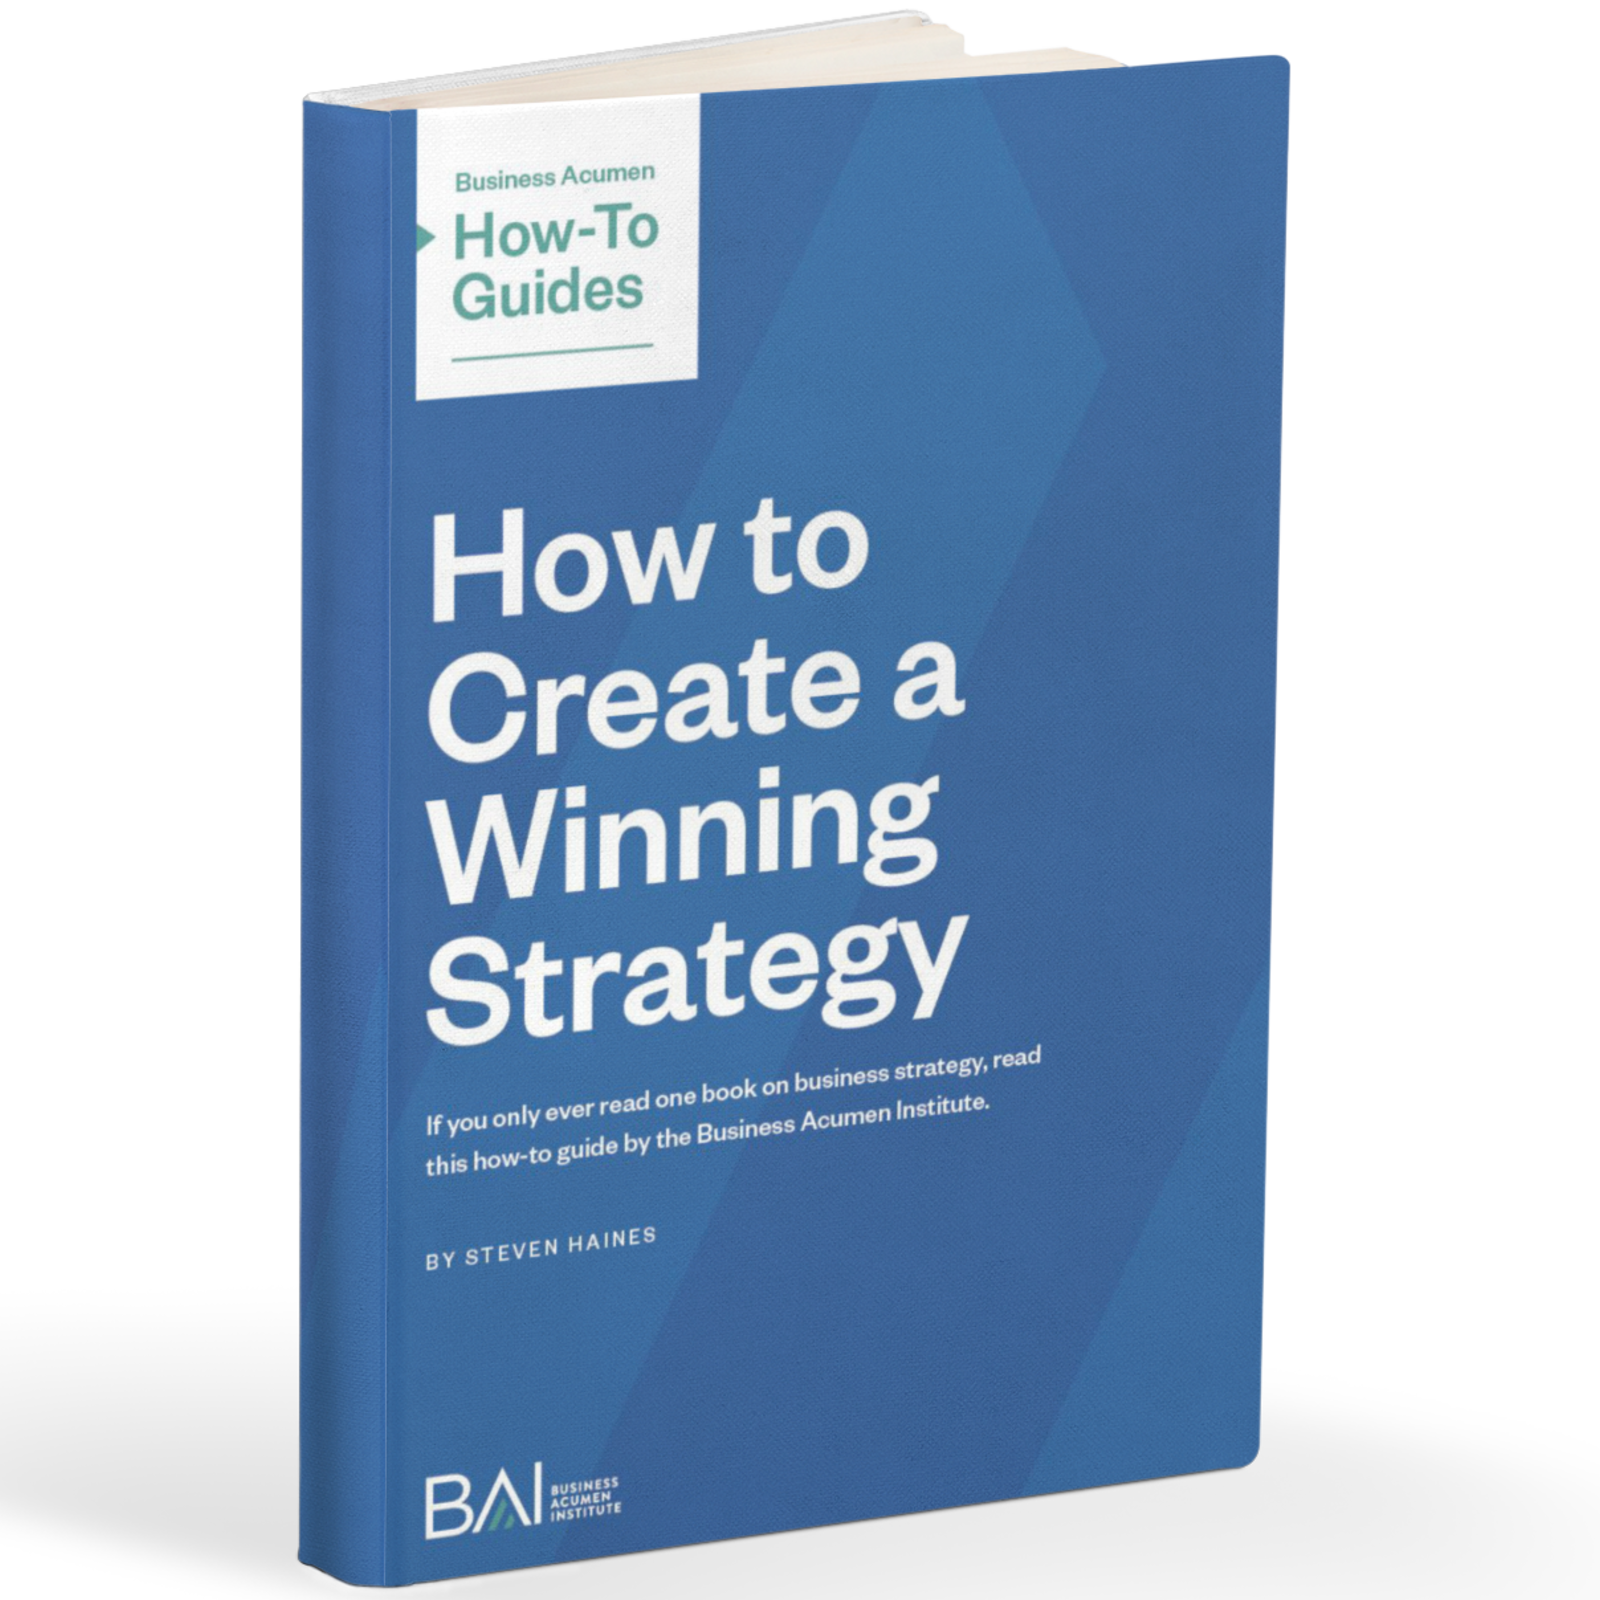 product strategy mini book free giveaway